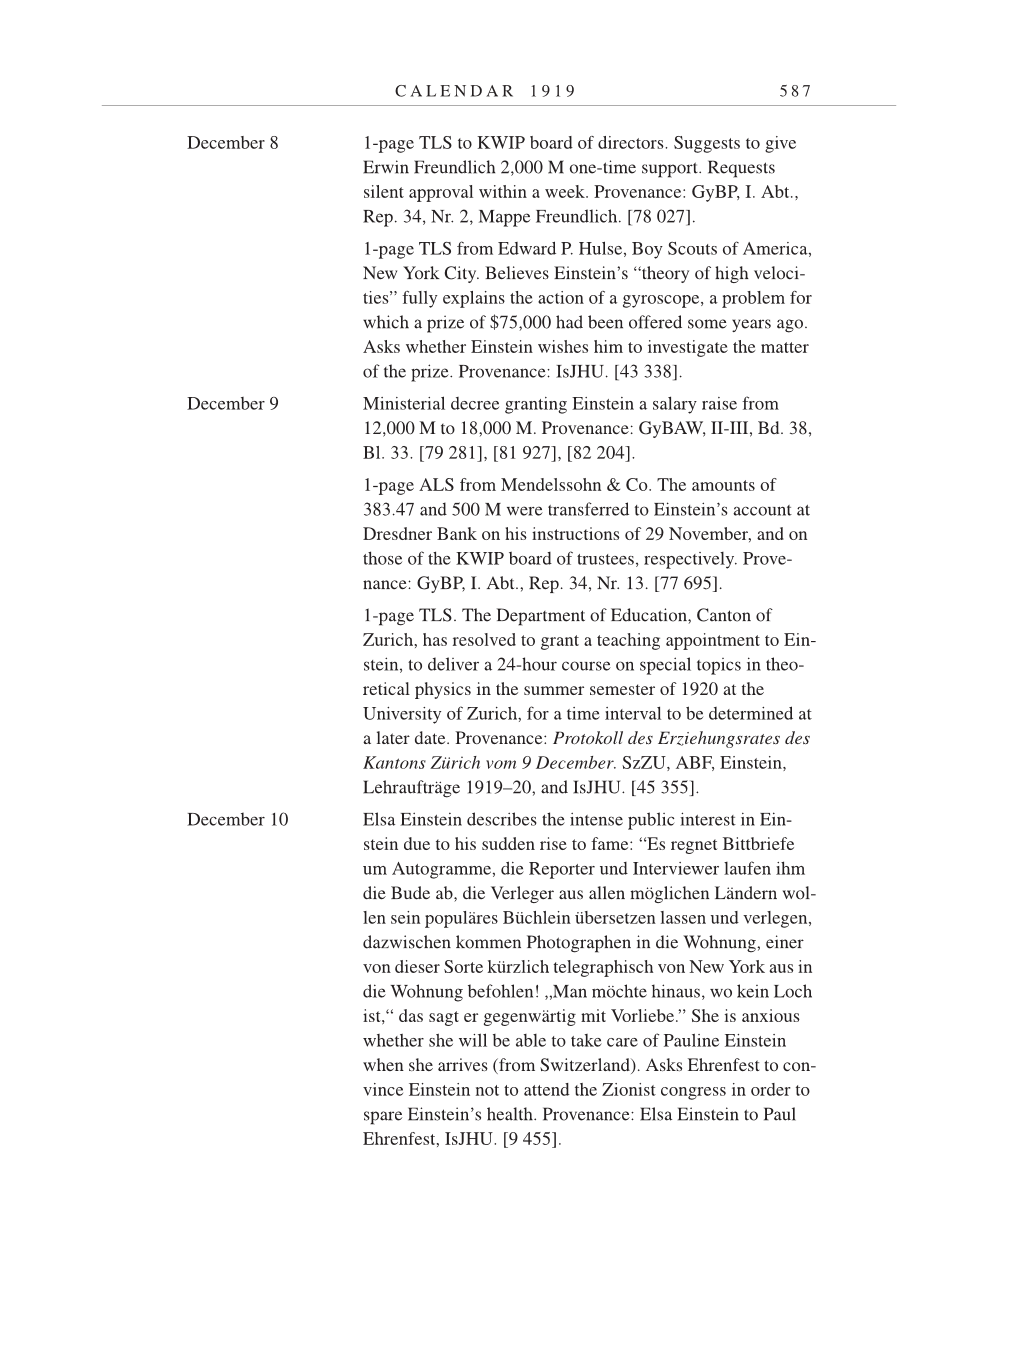 Volume 9: The Berlin Years: Correspondence January 1919-April 1920 page 587